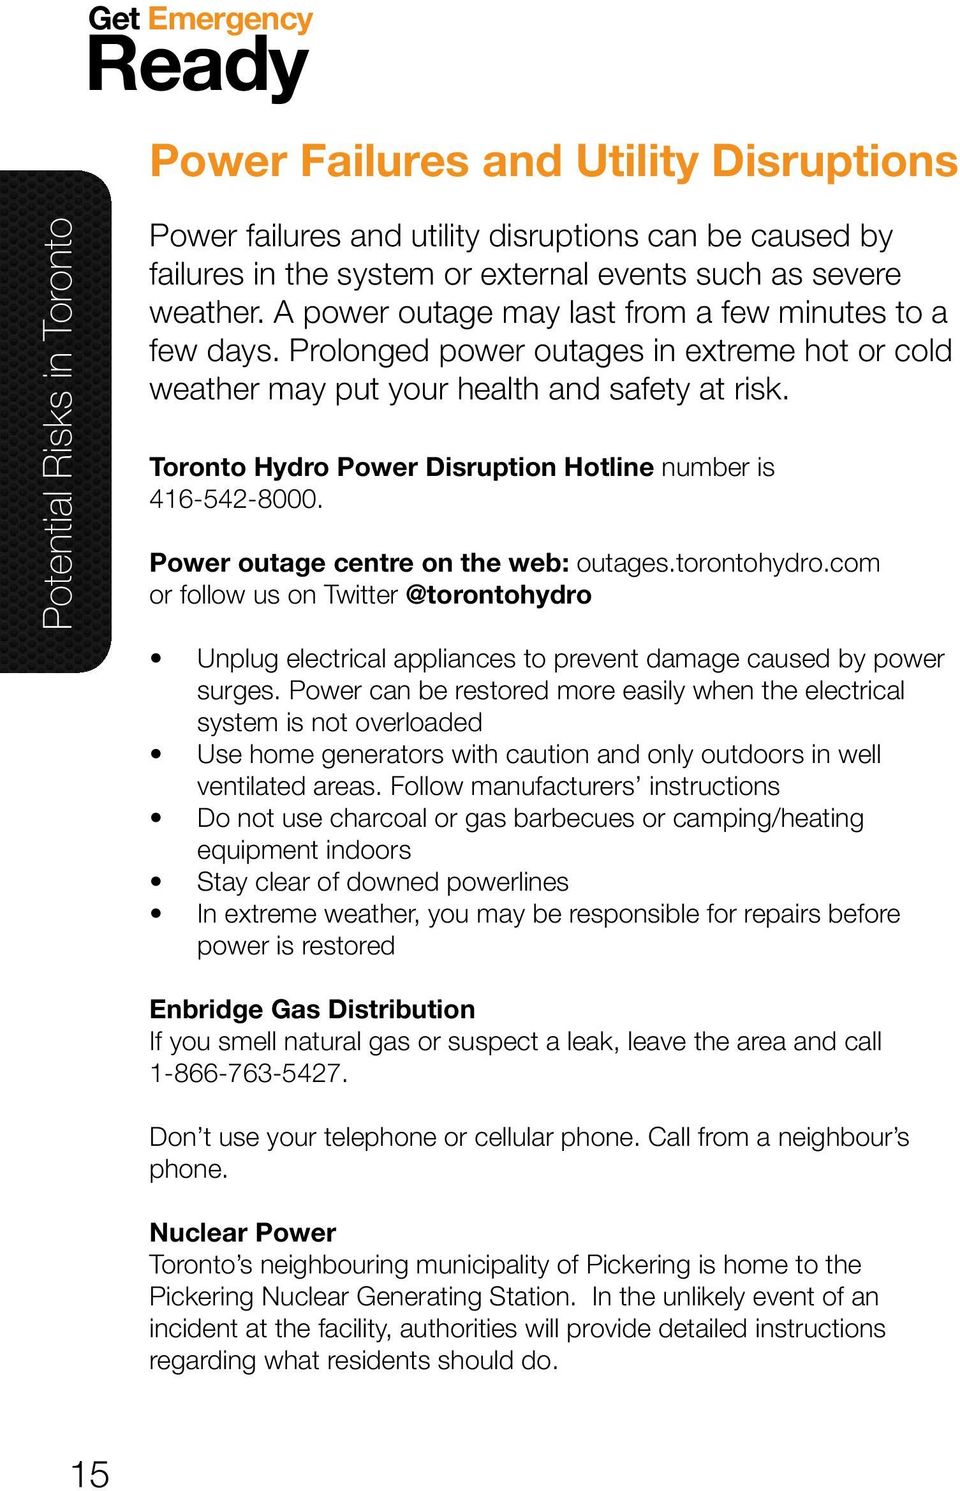 Toronto Hydro Power Disruption Hotline number is 416-542-8000. Power outage centre on the web: outages.torontohydro.